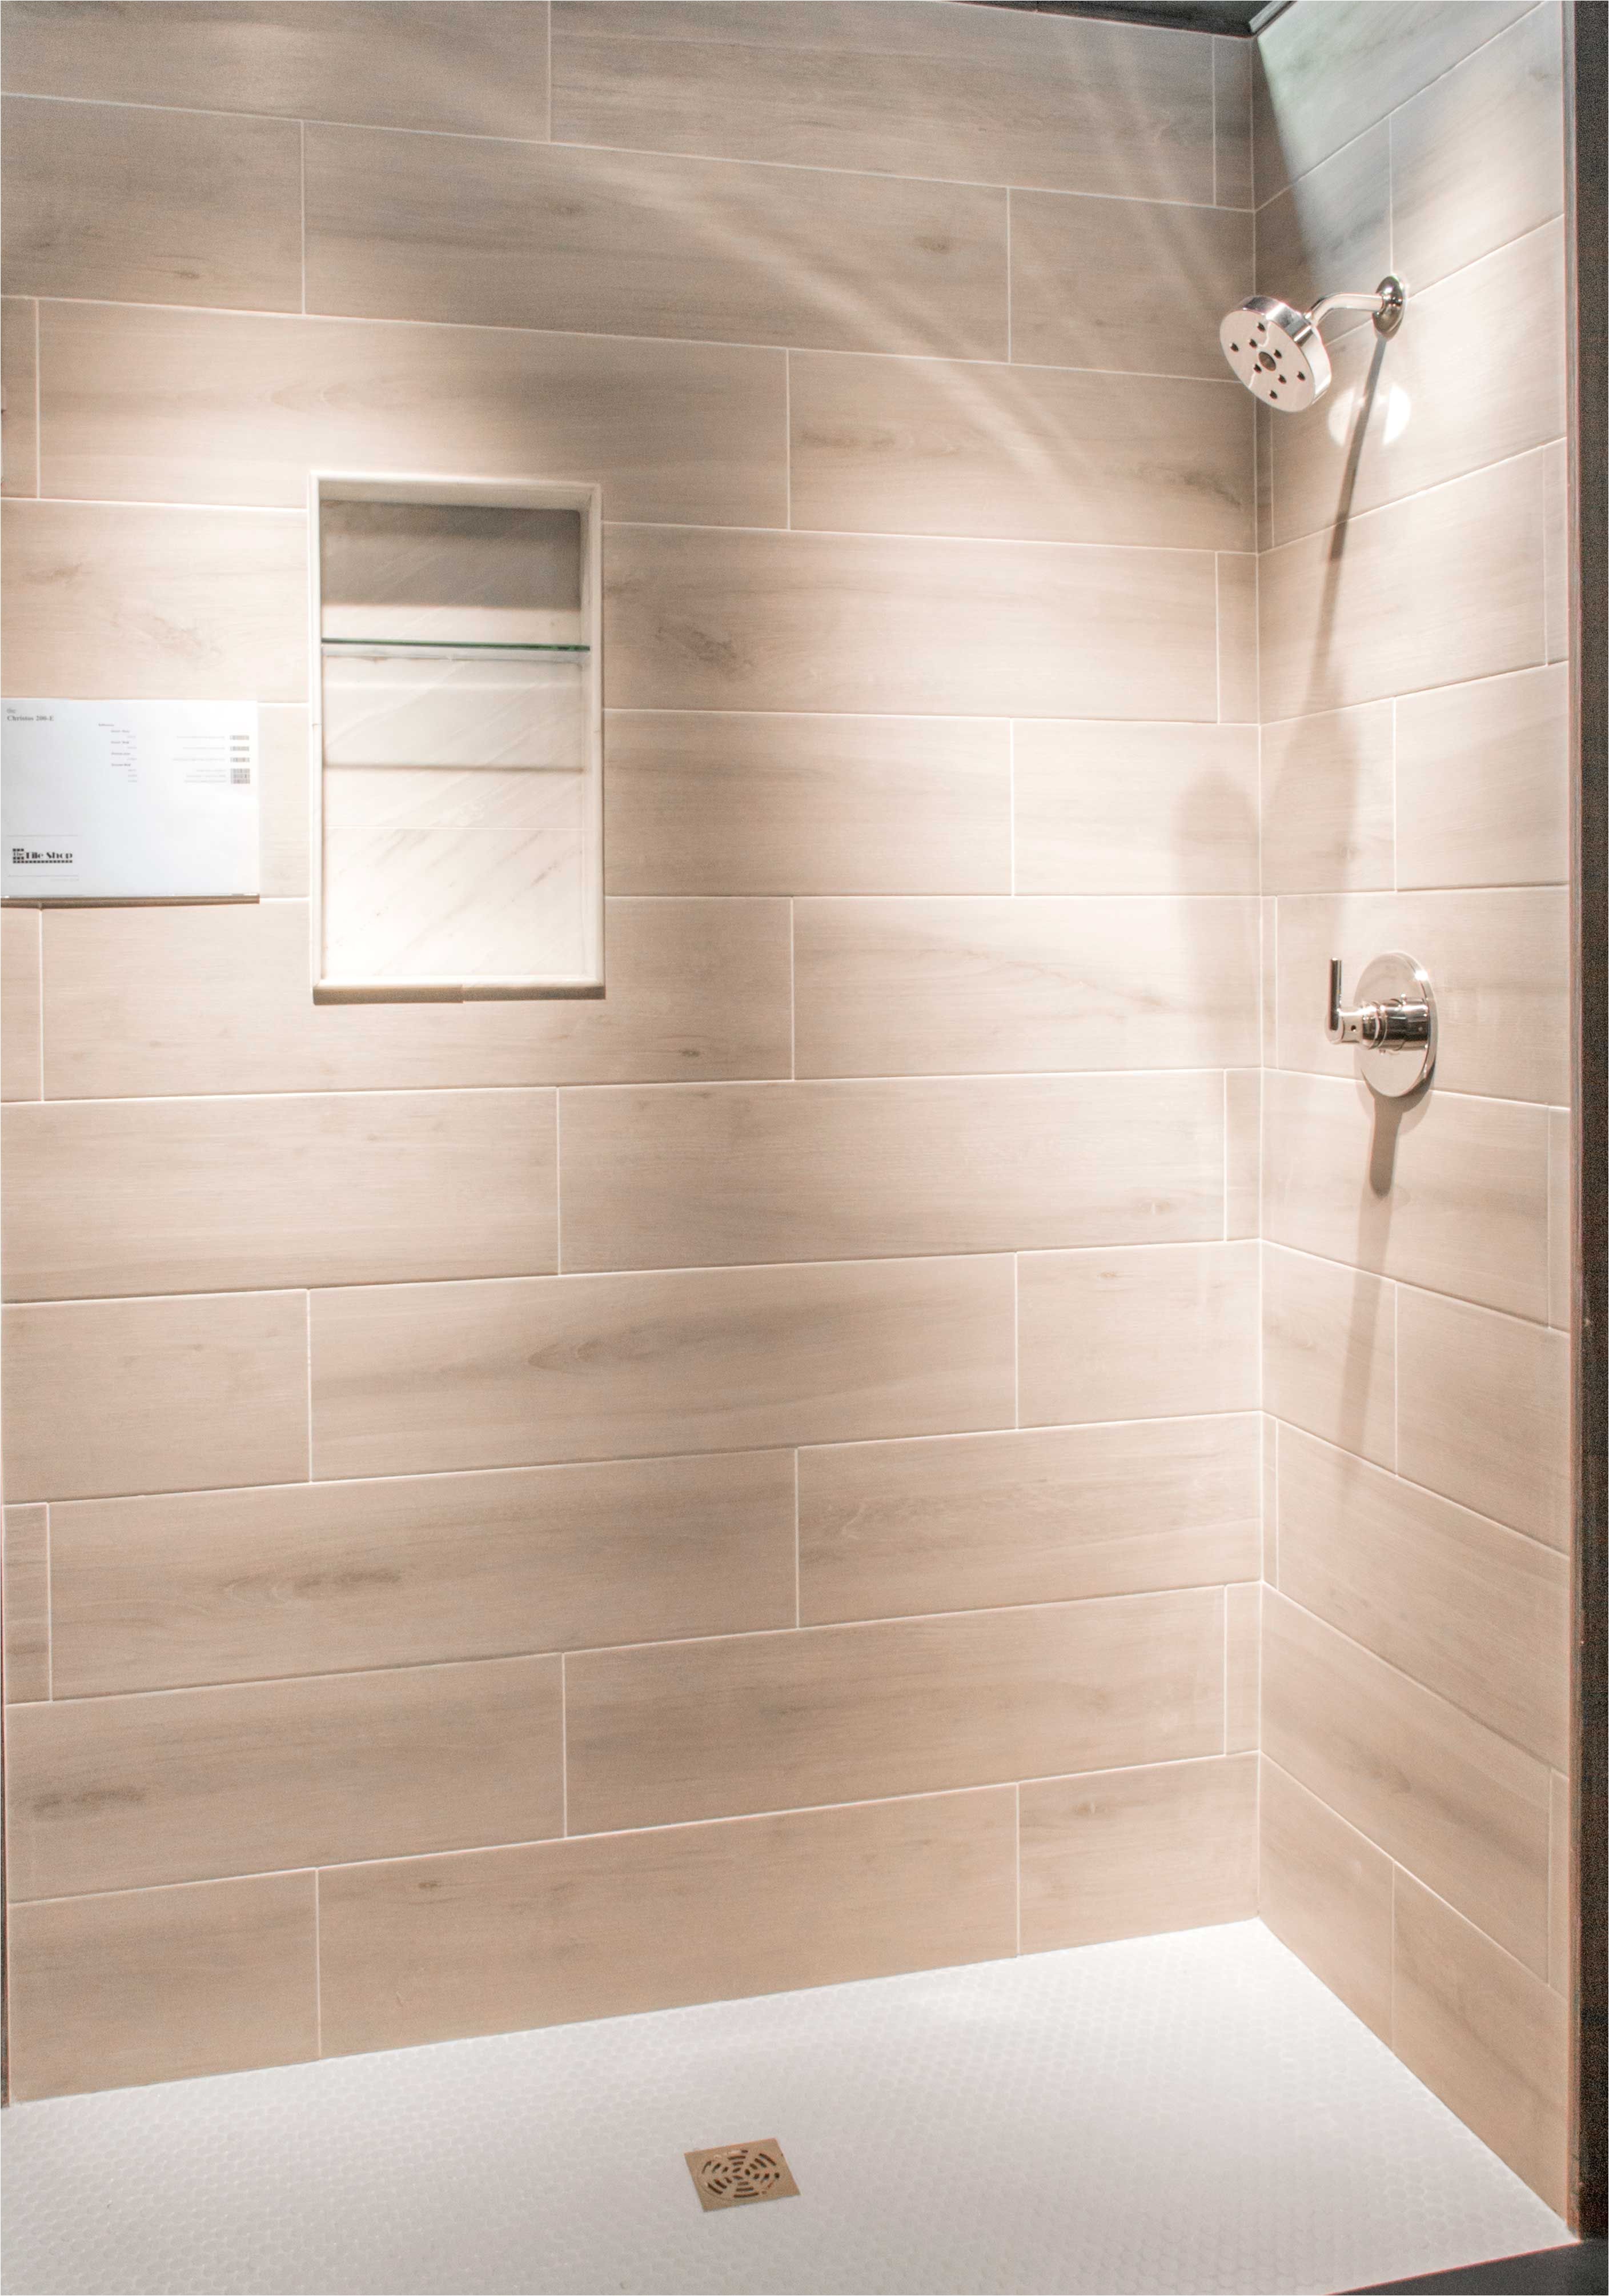 Cleaning Ceramic Tile Shower Bathroom Shower Wall Tile Bosco Cenere Faux Wood Wall and Floor